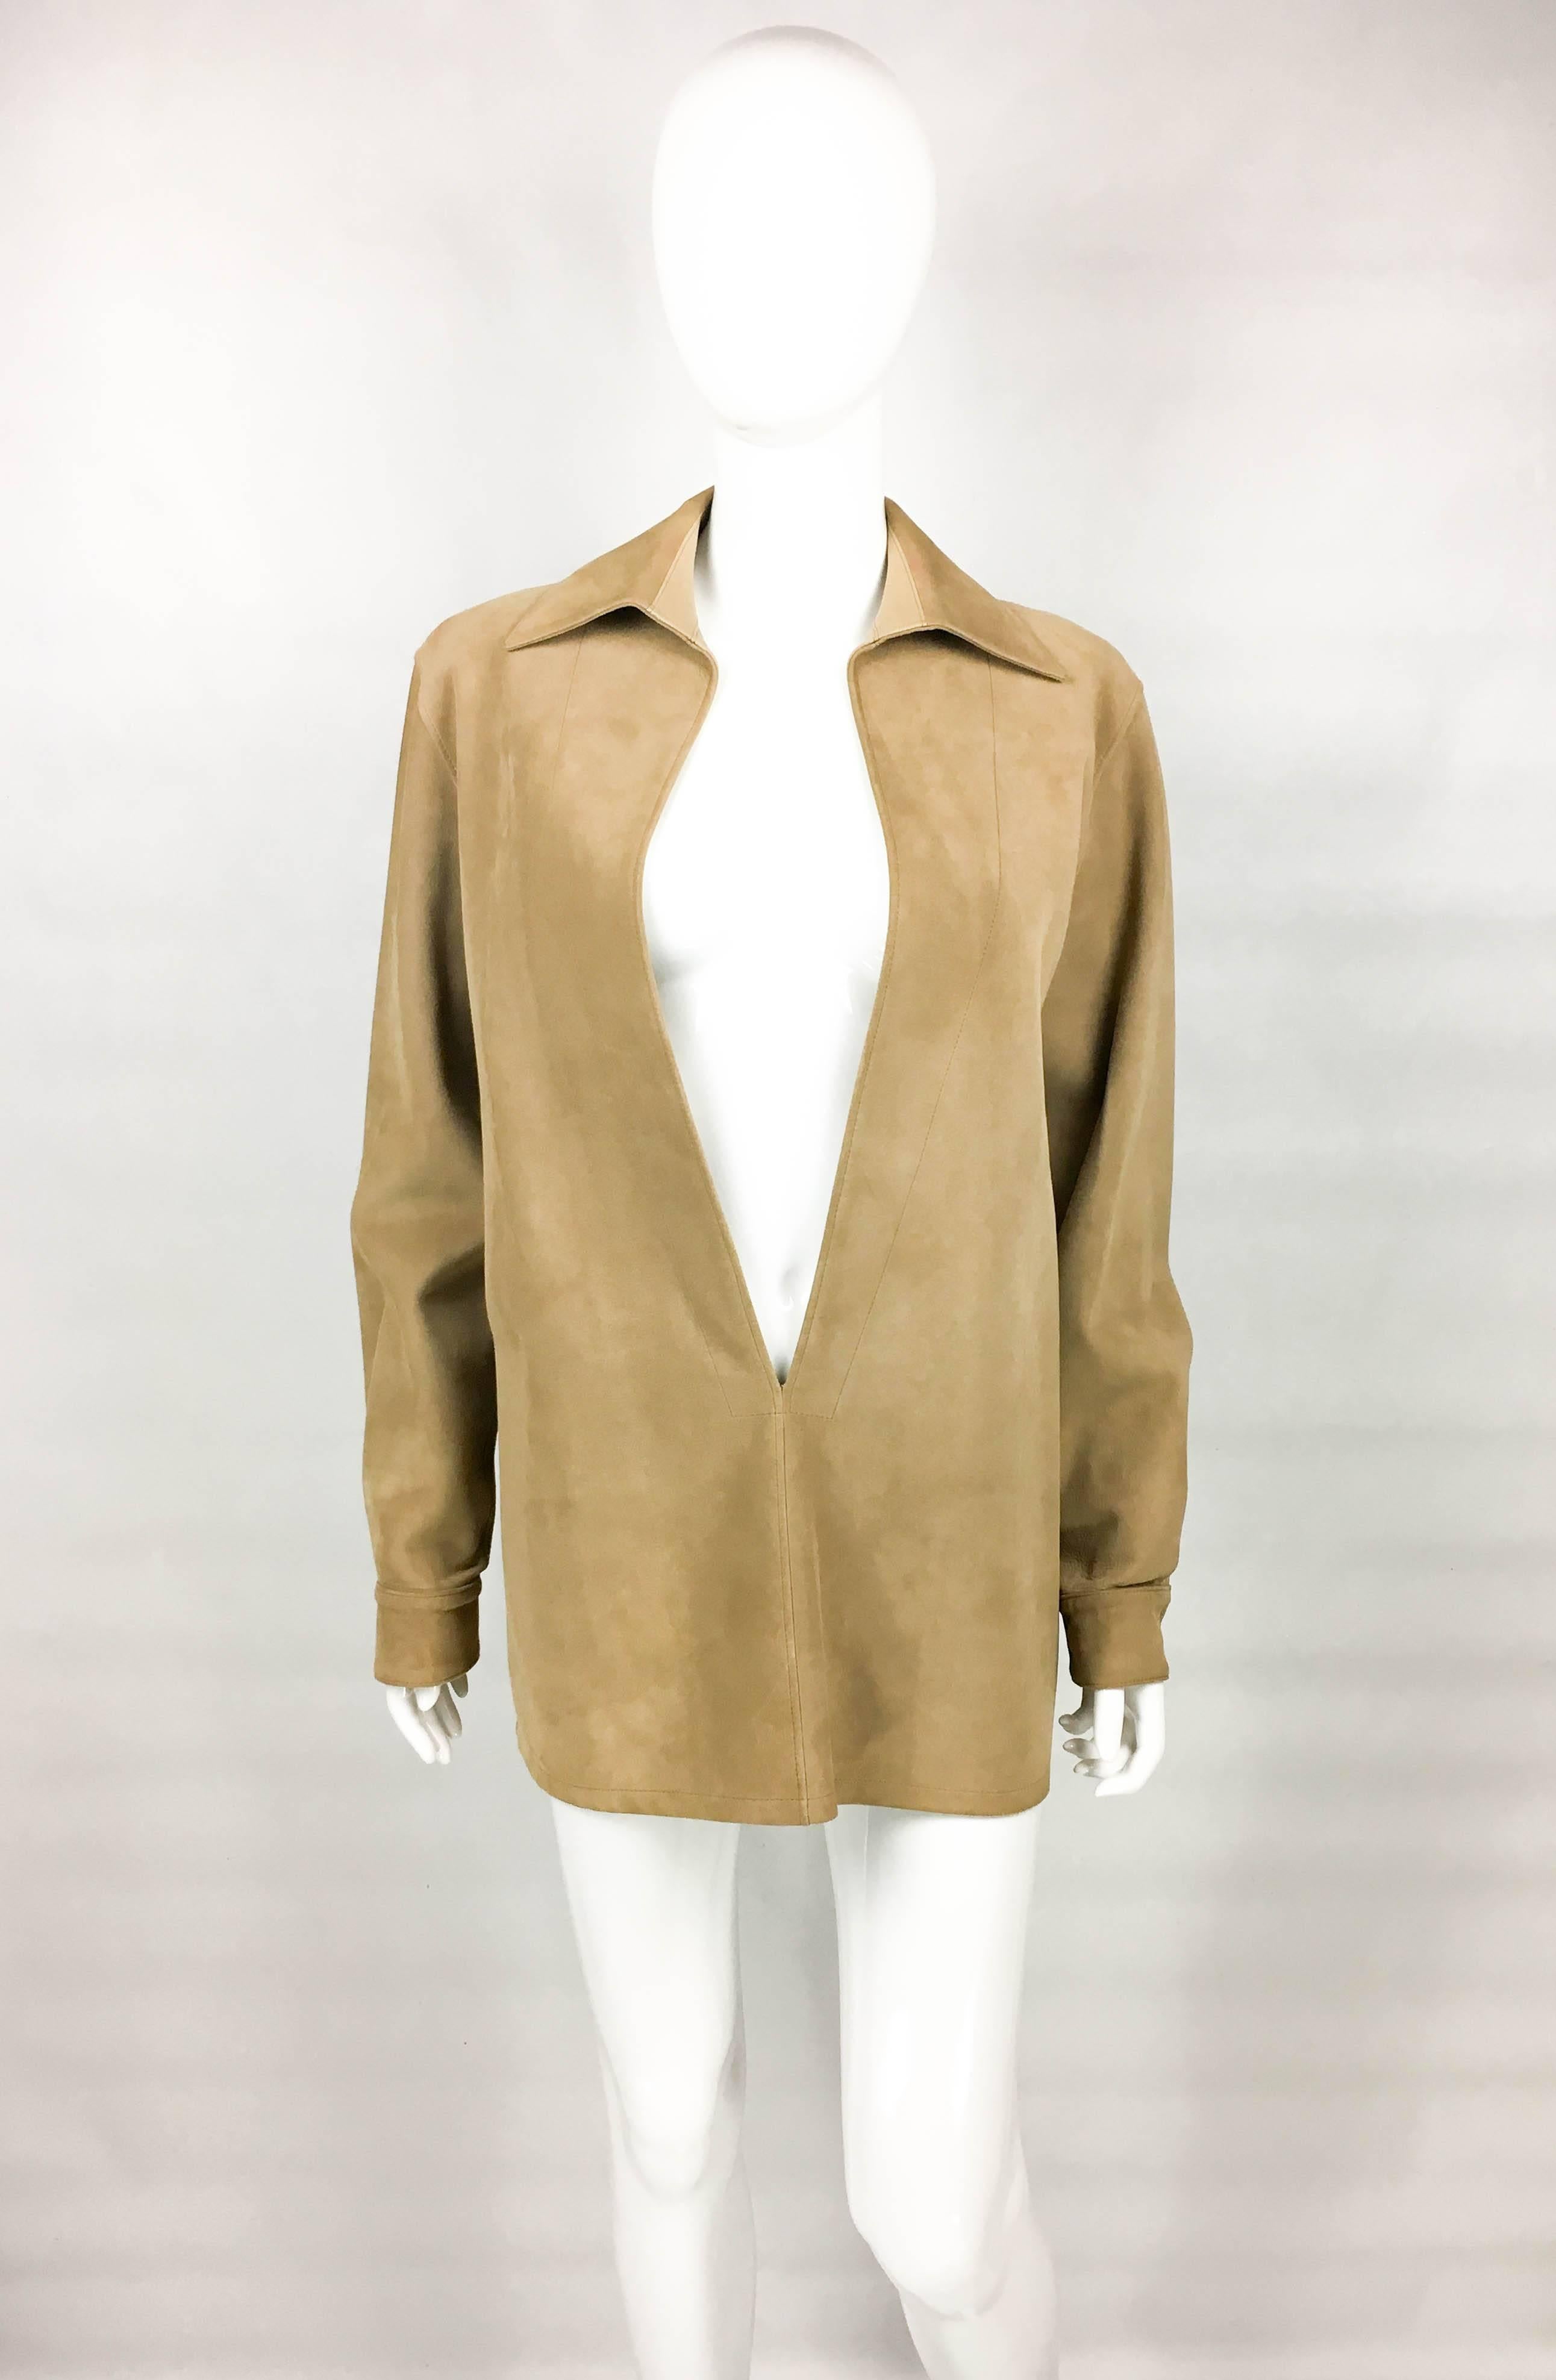 Vintage Hermes Tan Suede Tunic. This ultra-elegant tunic by Hermes was created by the iconic designer Martin Margiela in 1998. Margiela reworked the classic Hermes’ trademarks during his reign, and was widely responsible for the resurgence of the